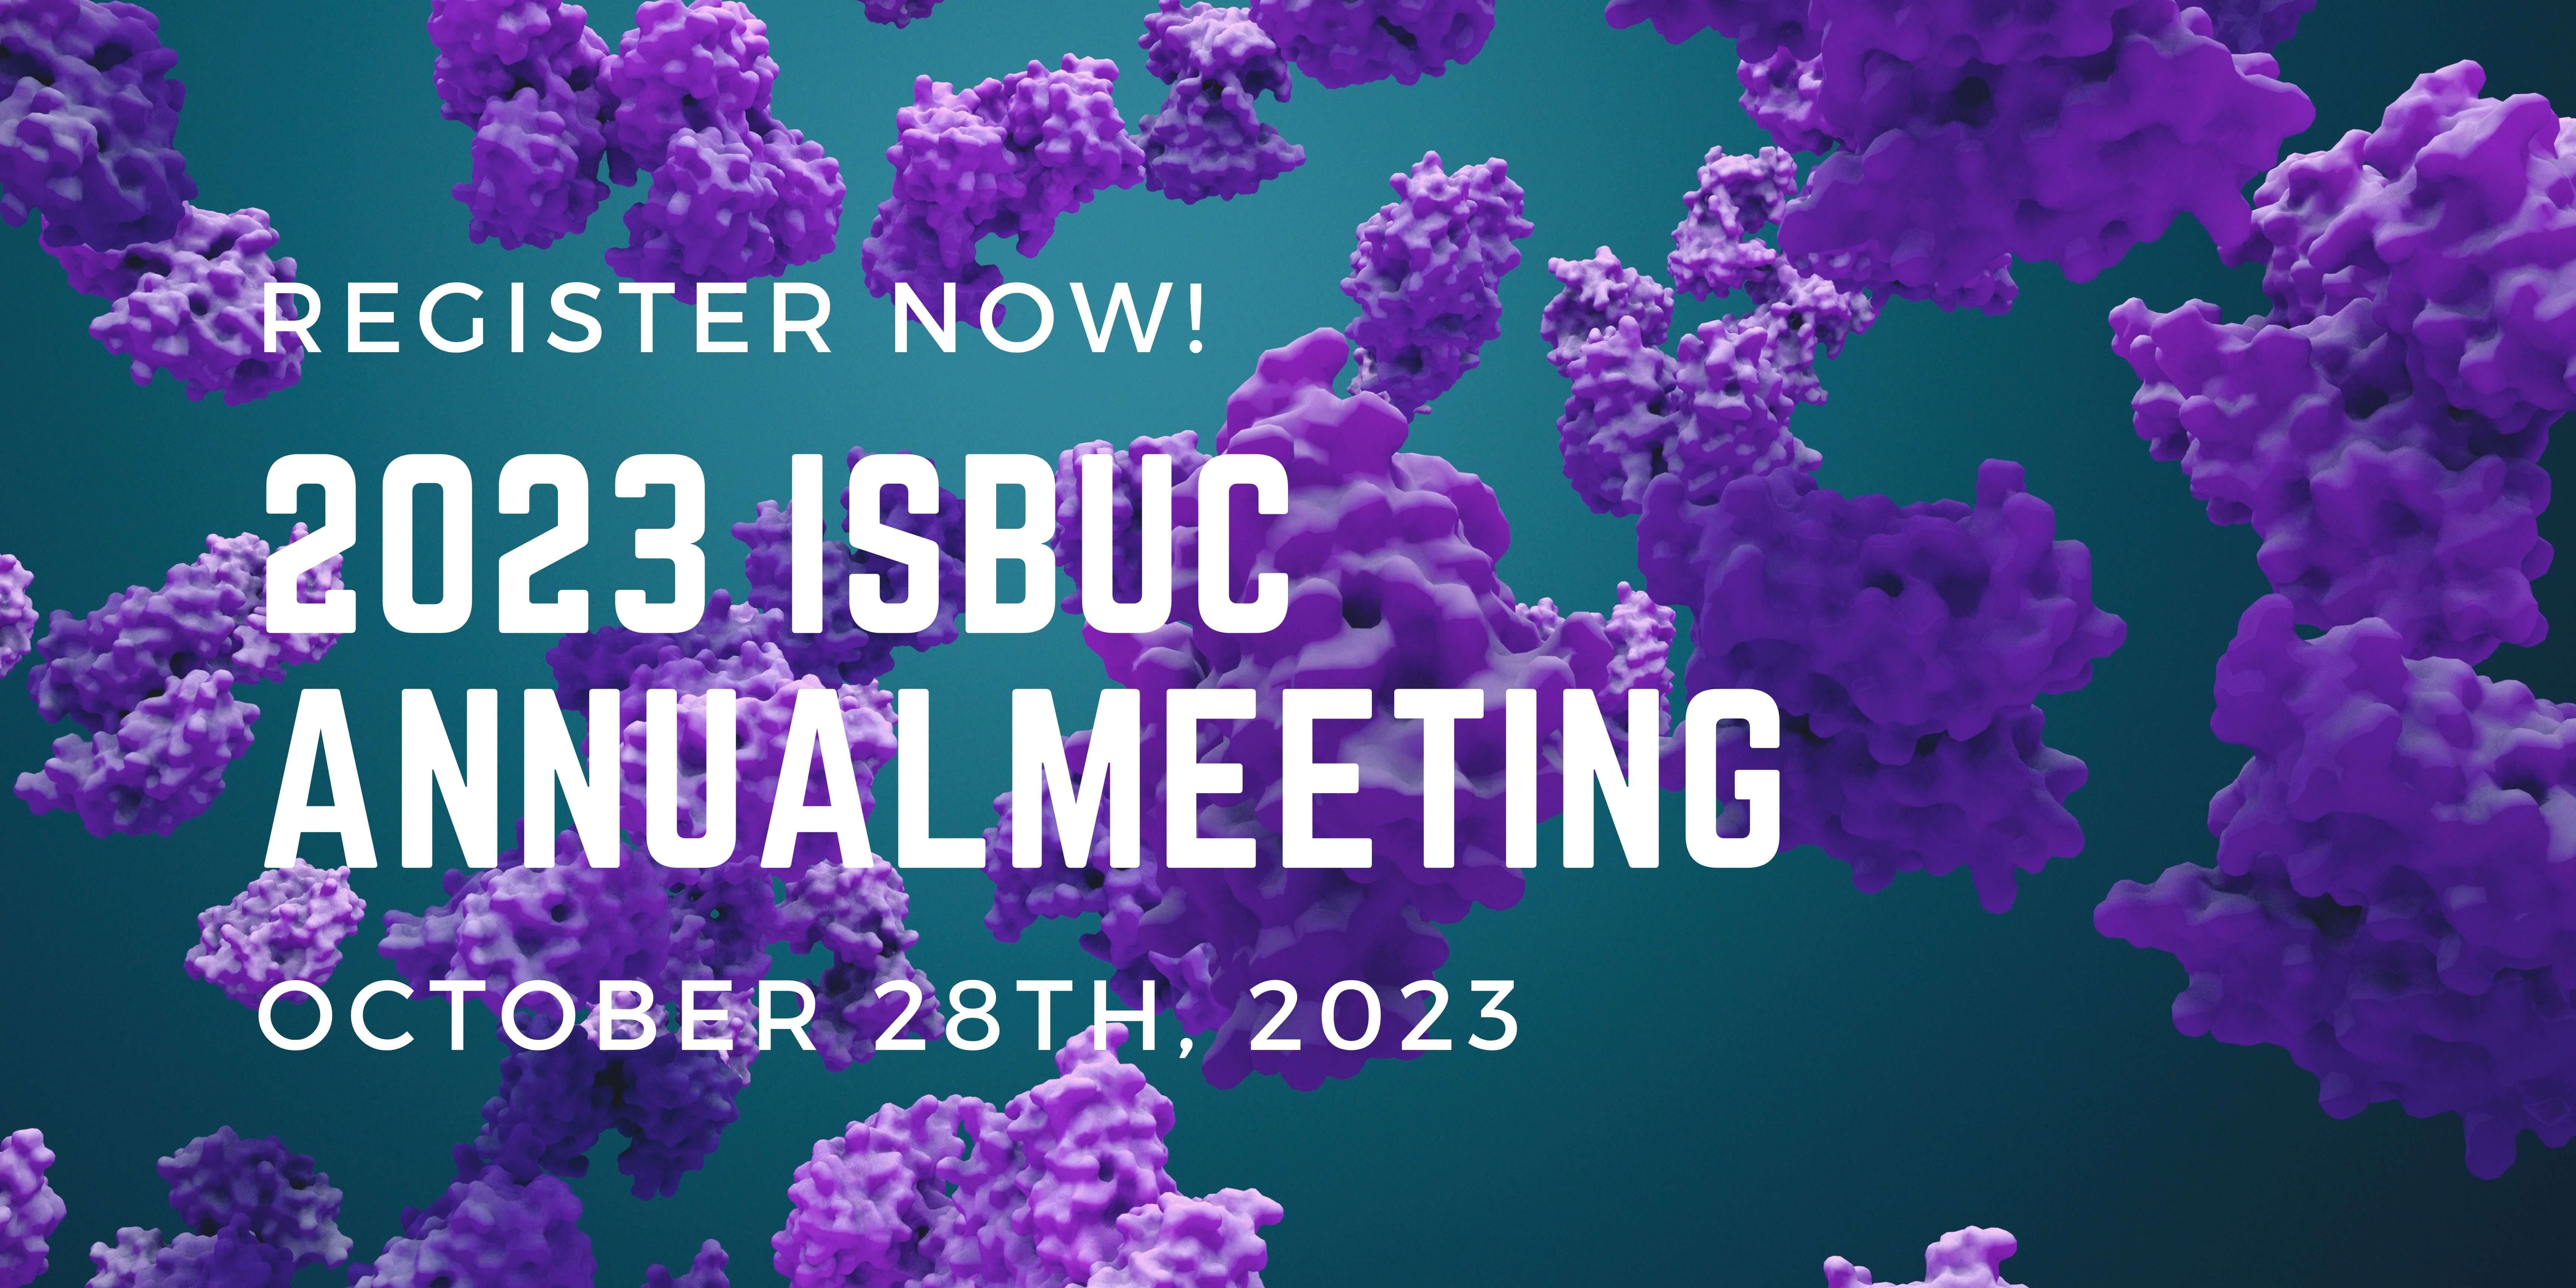 Integrative Structural Biology cluster 2023 Annual Meeting